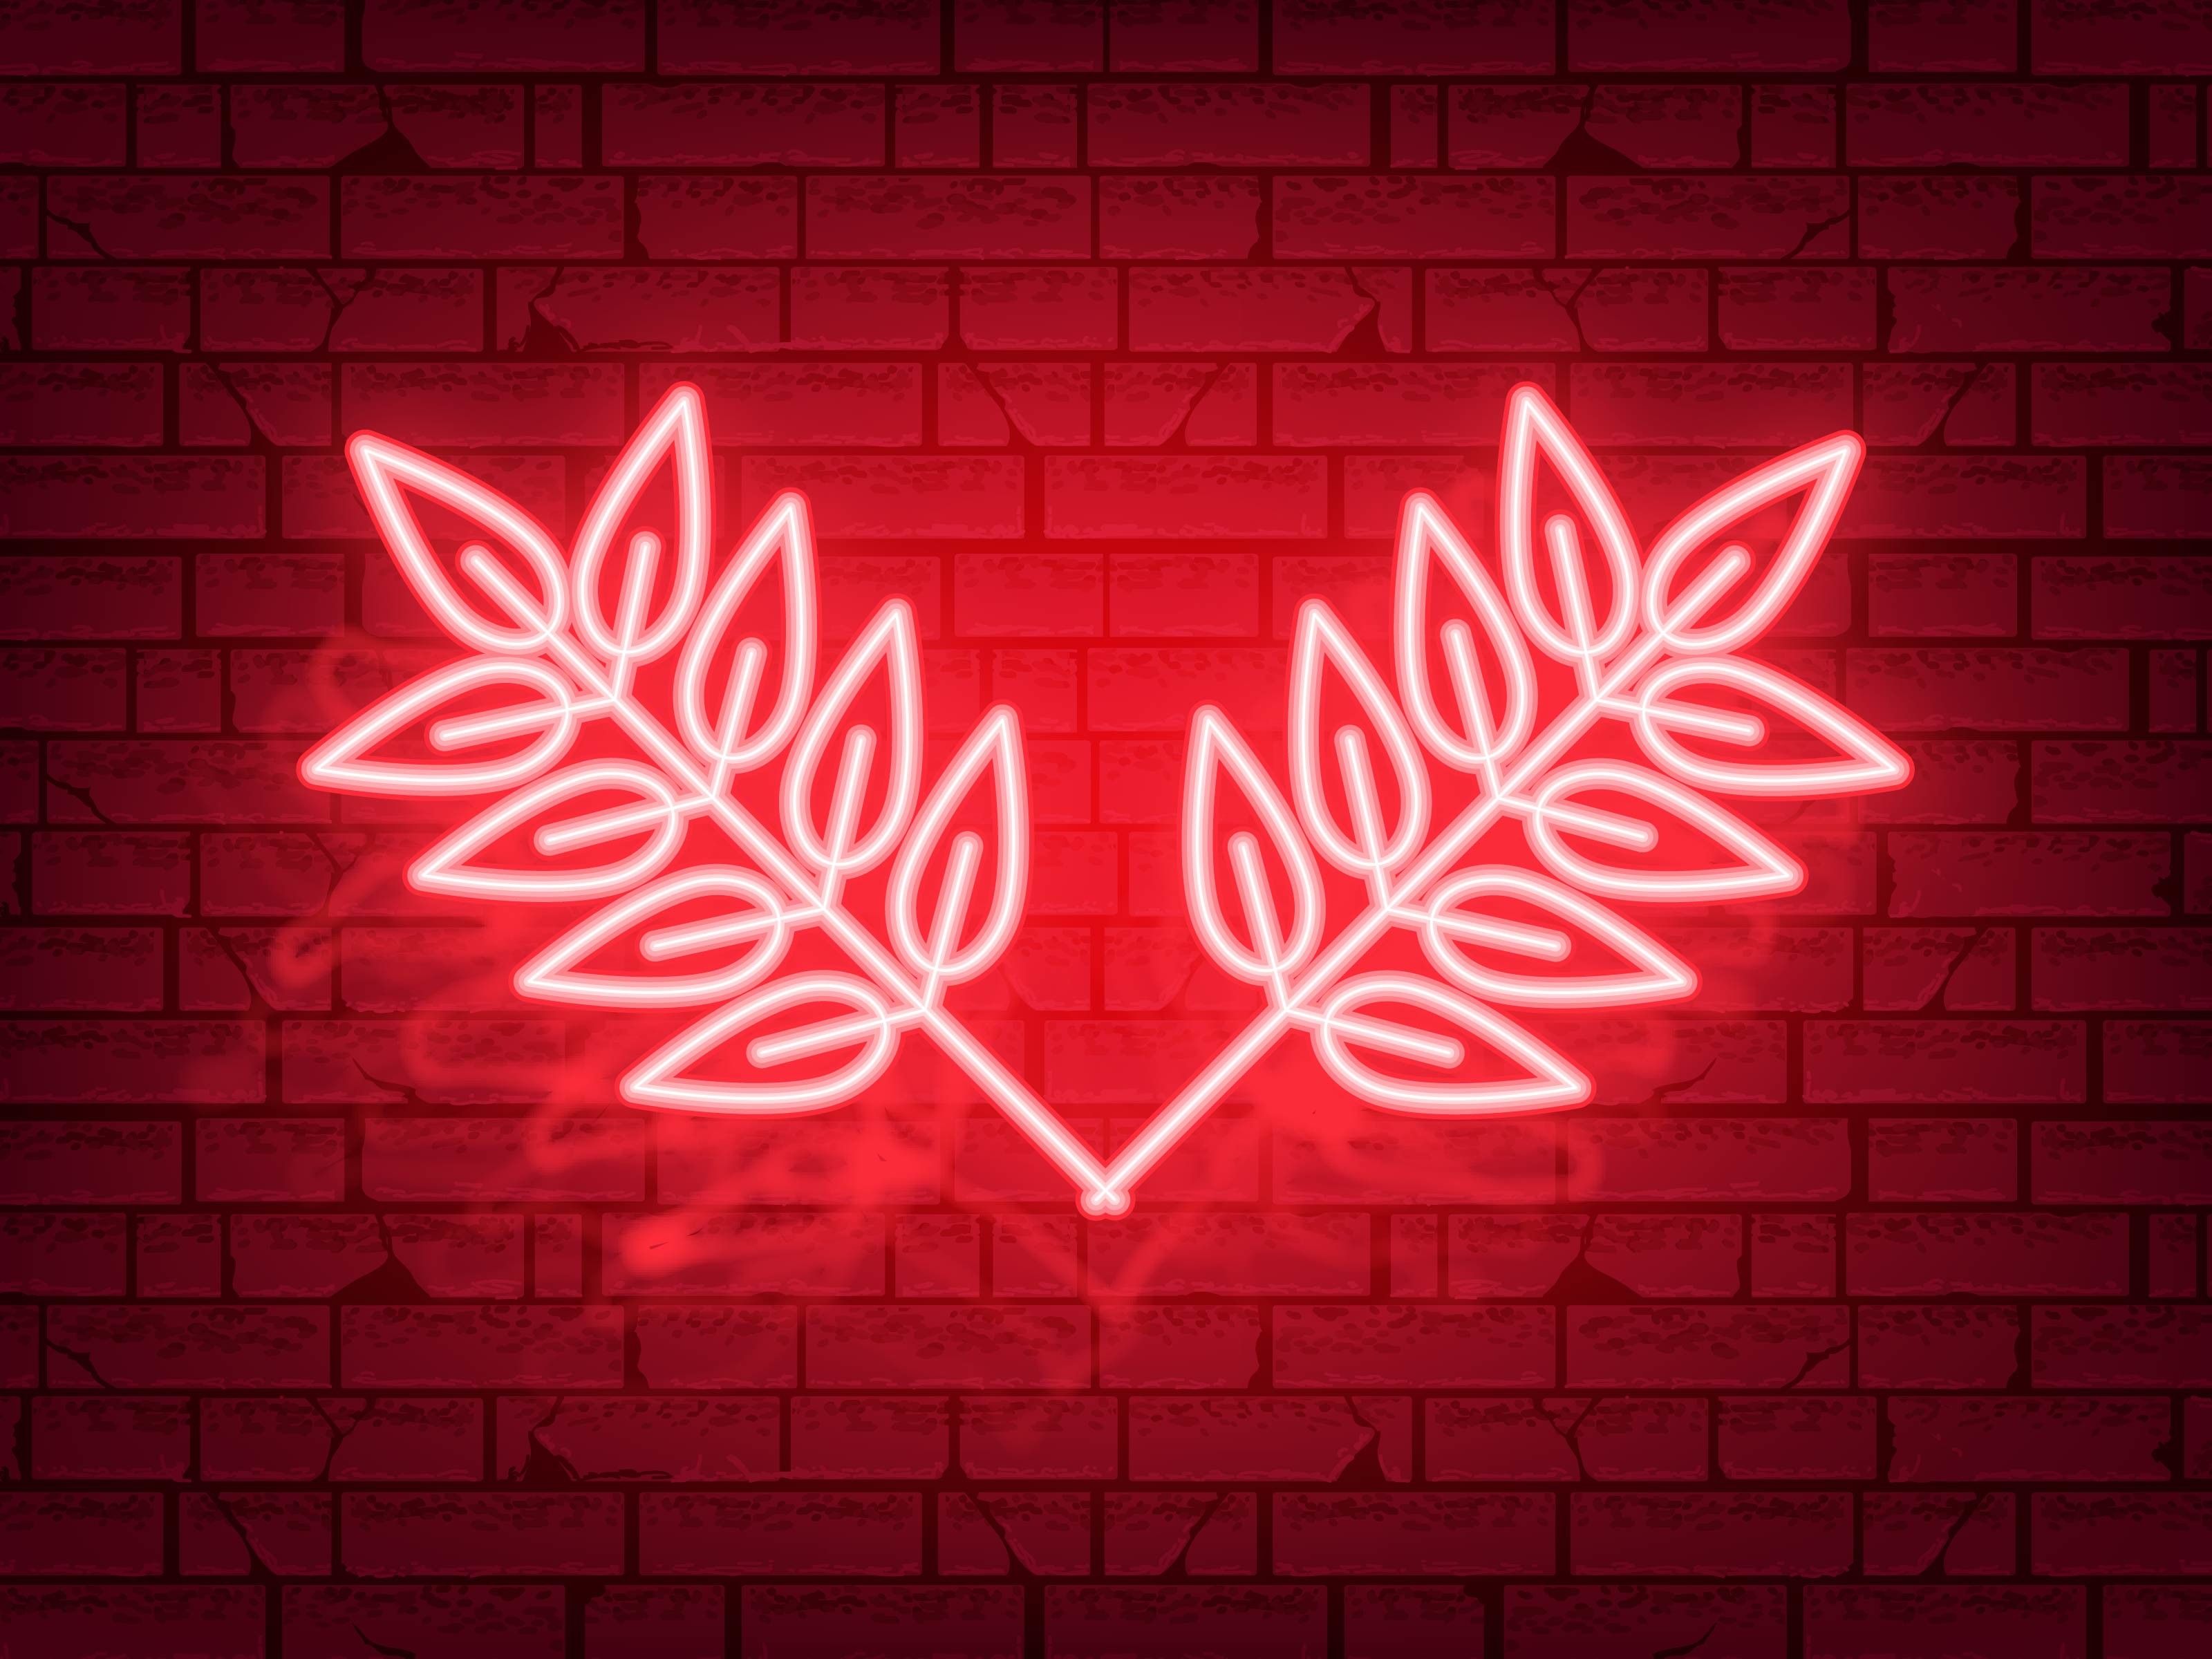 A neon sign of a heart made out of leaves - 